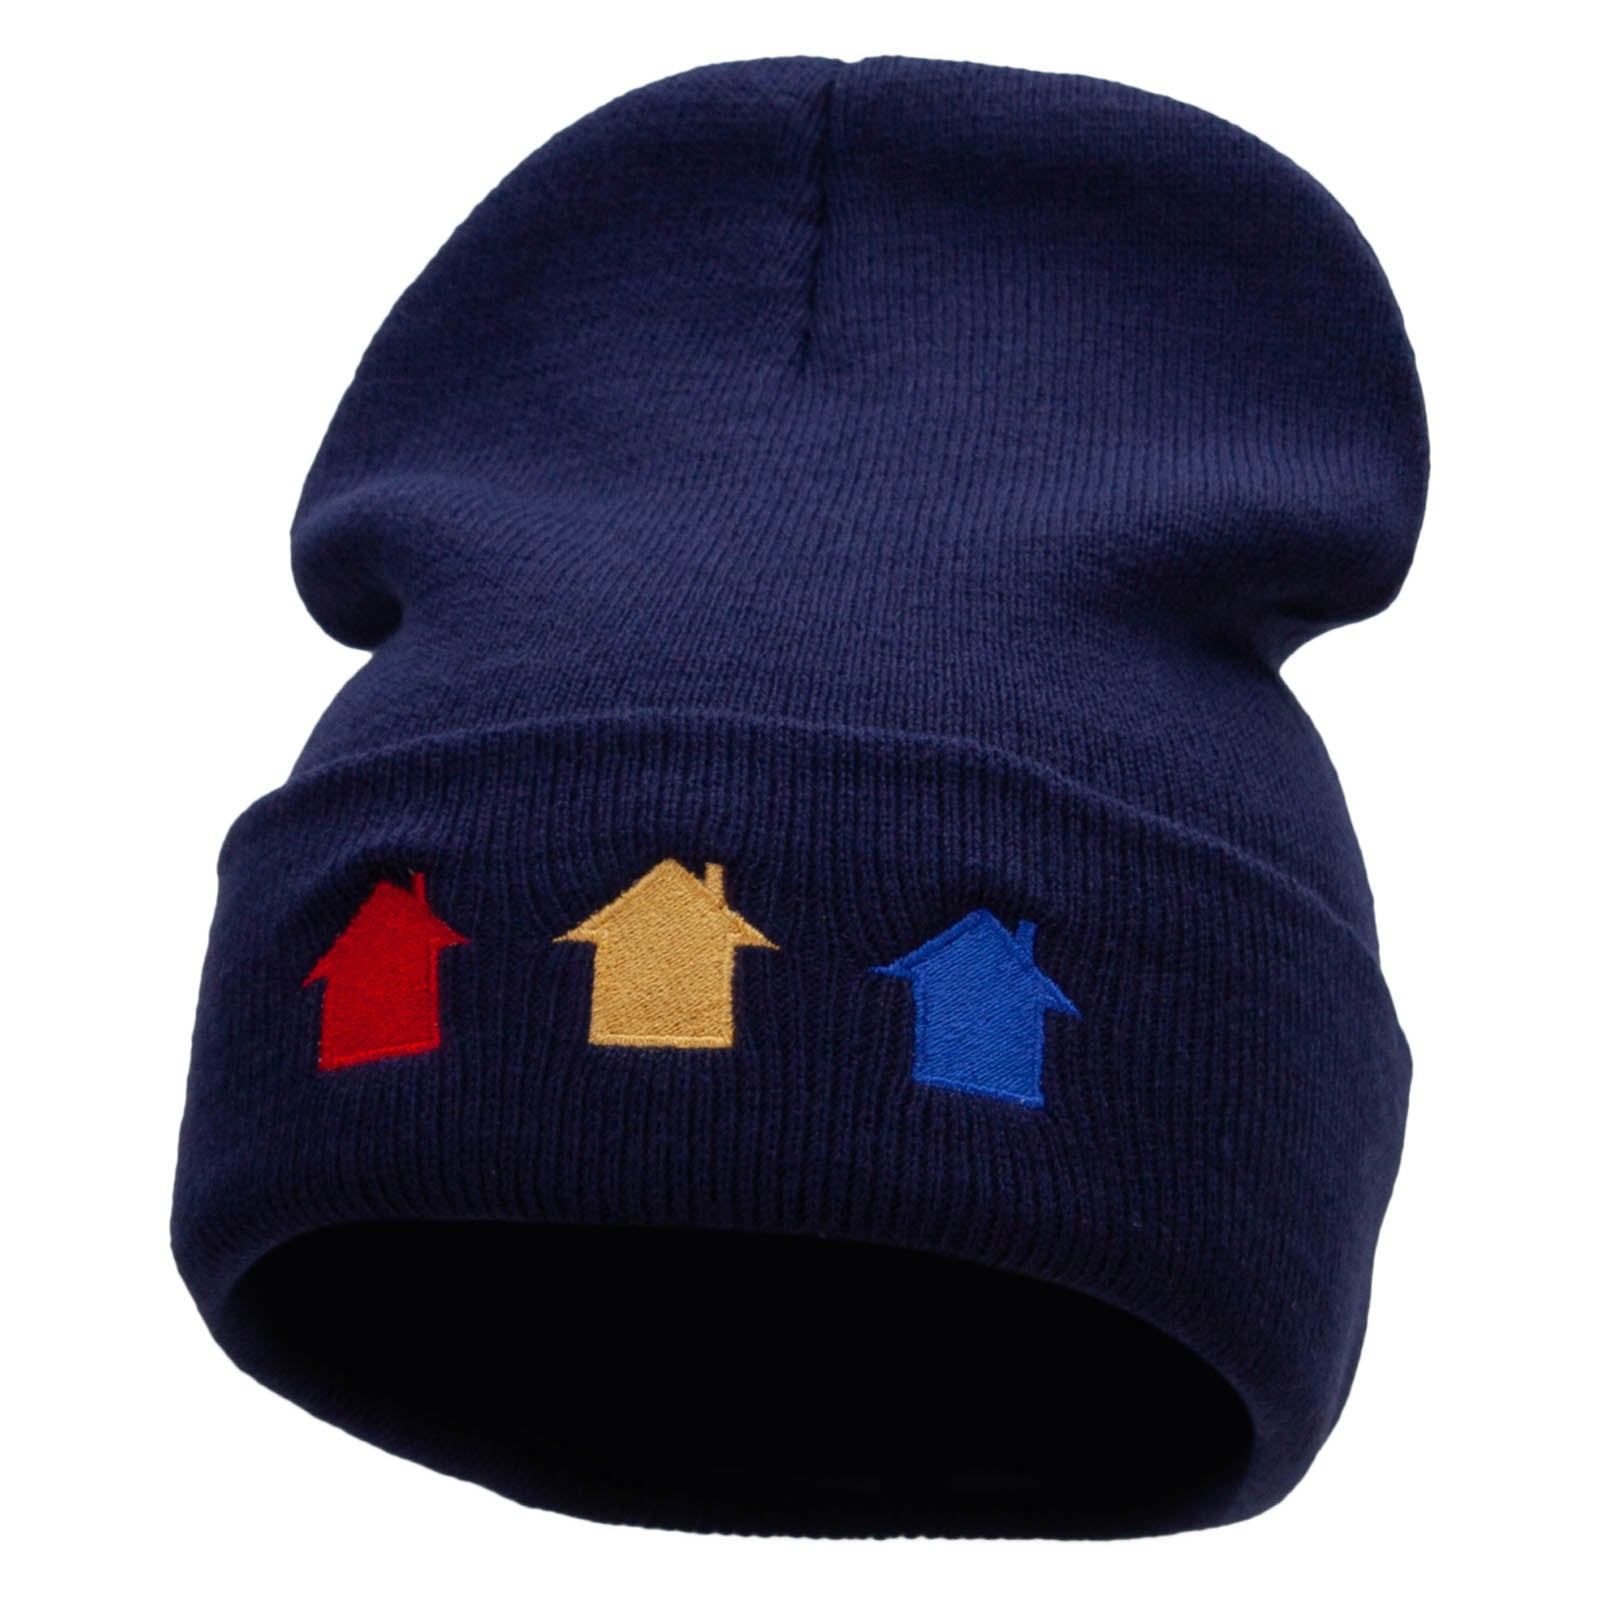 Monopoly Houses Embroidered 12 inch Acrylic Cuffed Long Beanie - Navy OSFM